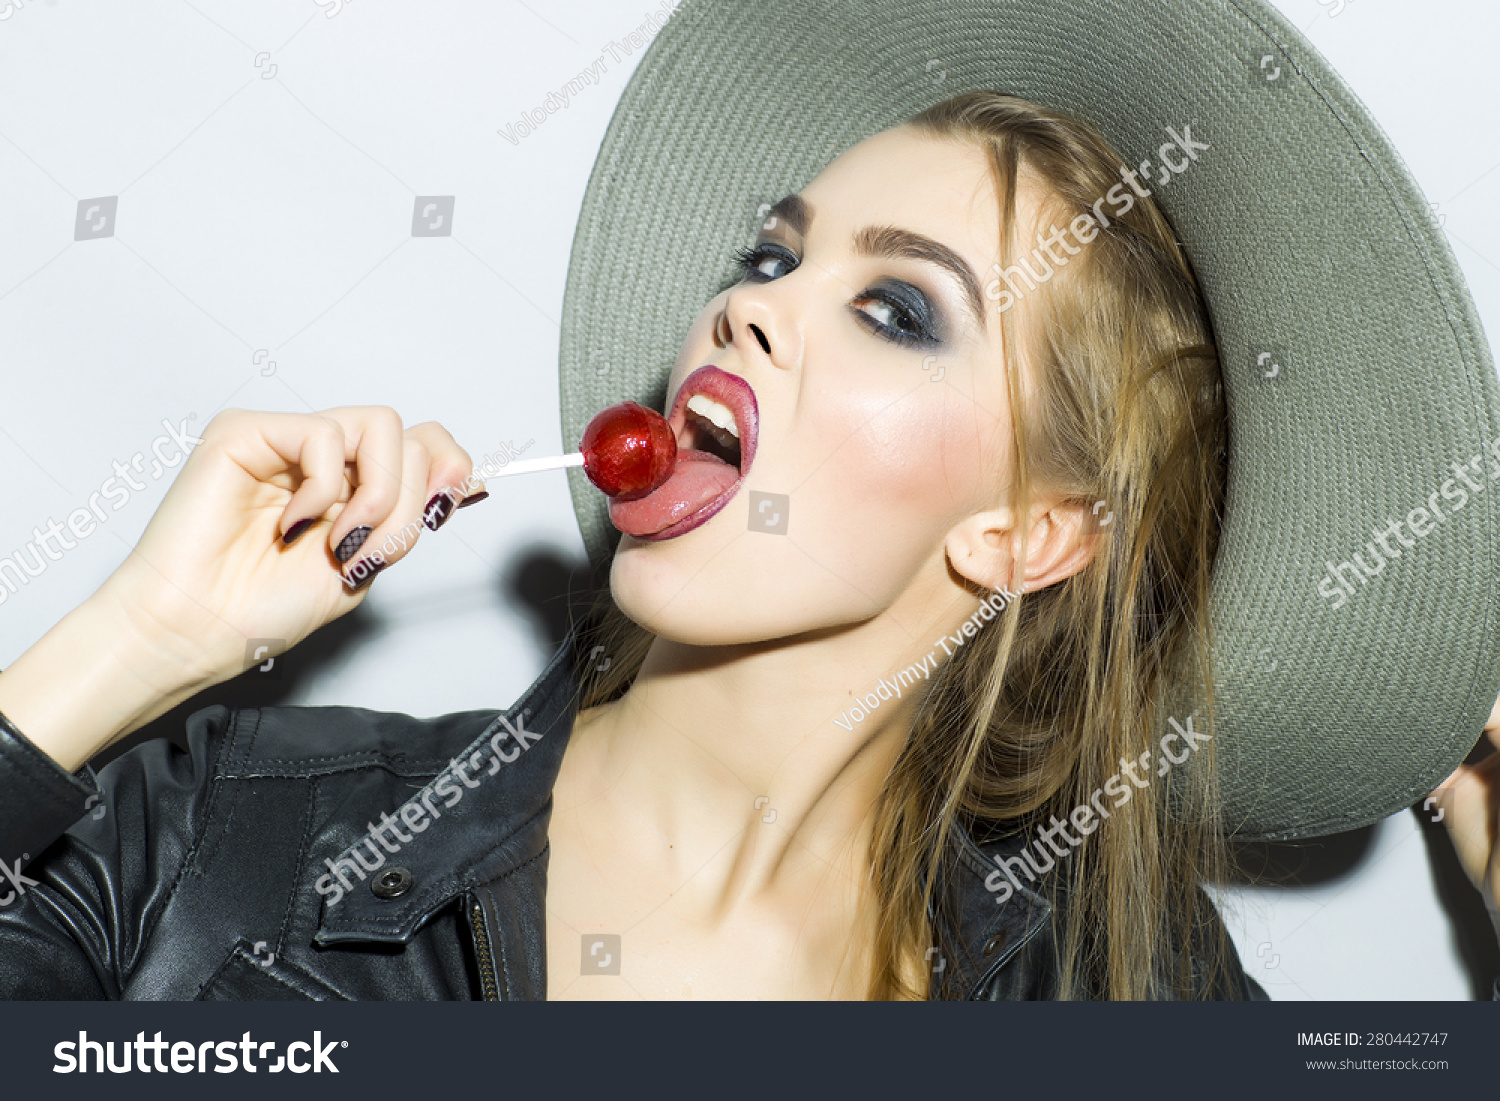 Impetuous young blonde girl portrait with bright make up in hat leather jacket and jeans looking forward holding and licking round red candy standing on gray background copyspace, horizontal picture #280442747